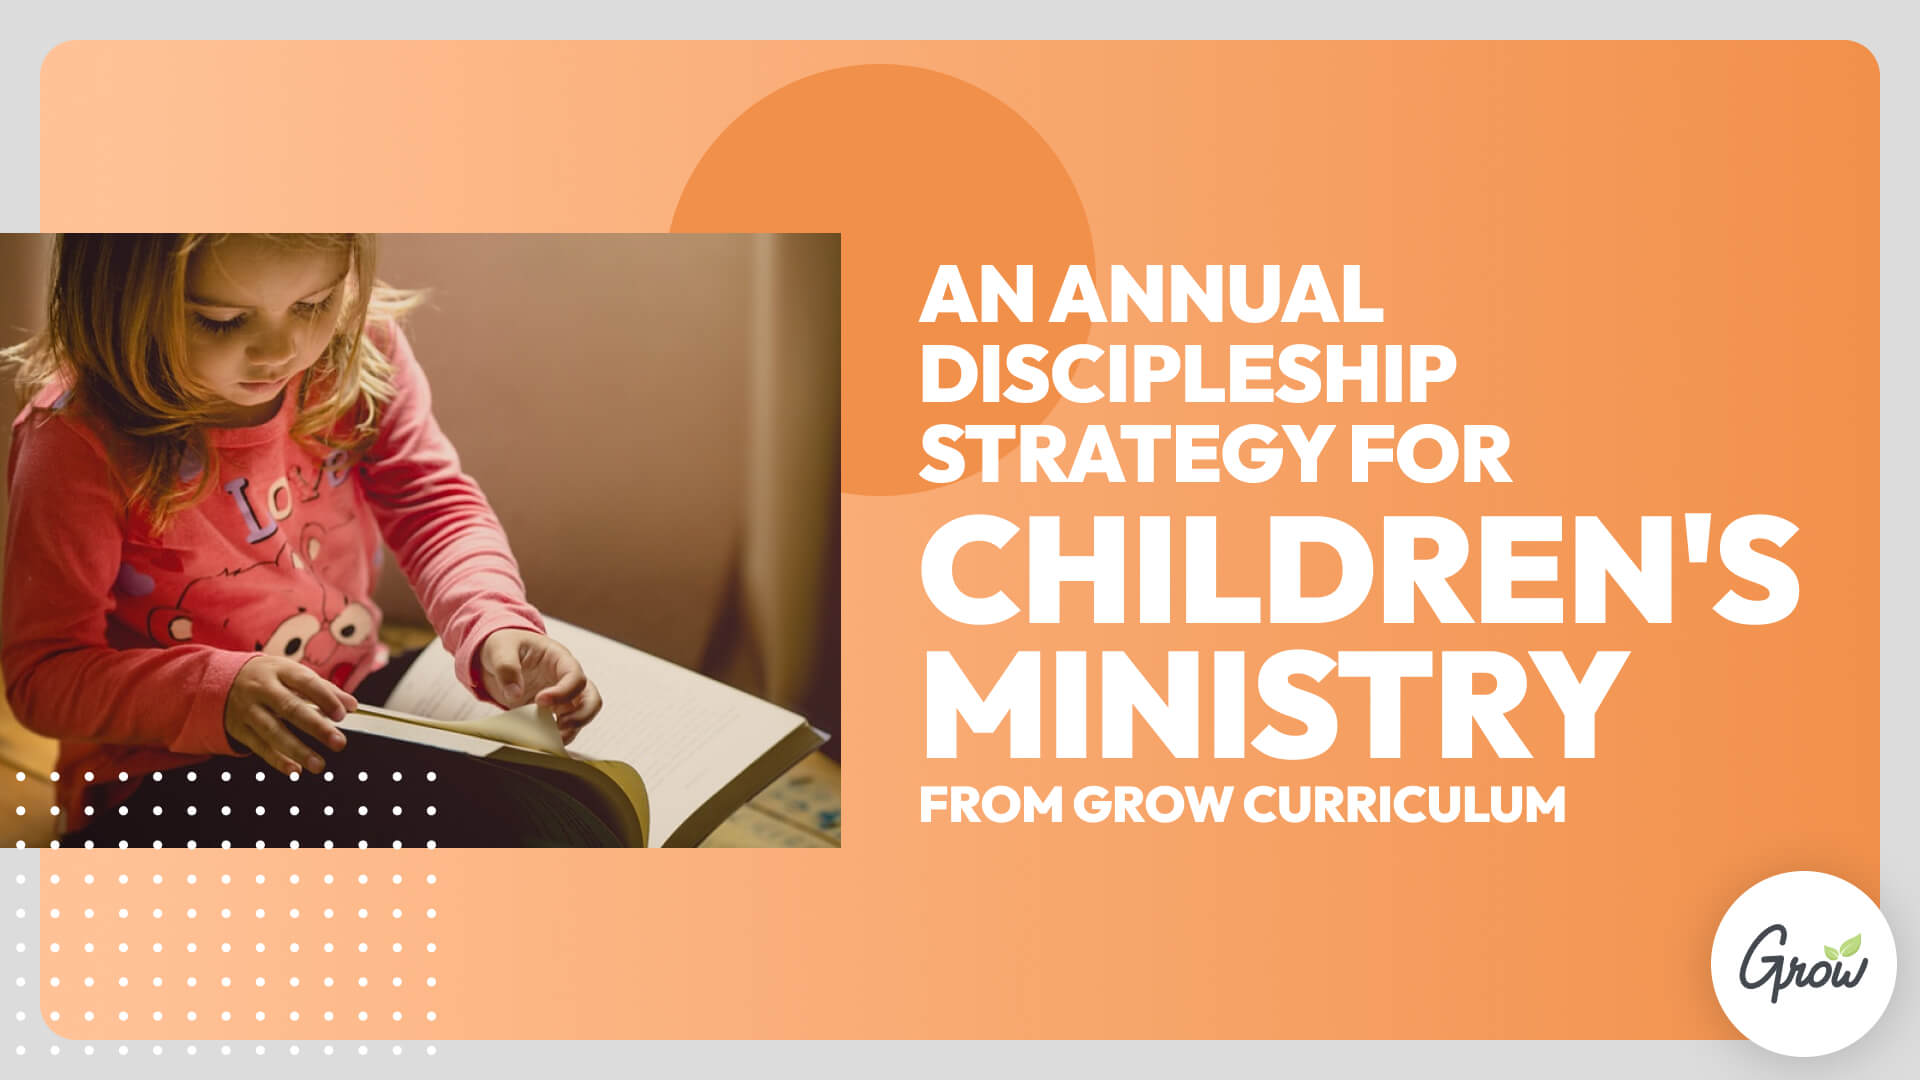 An Annual Discipleship Strategy for Children's Ministry from Grow Curriculum